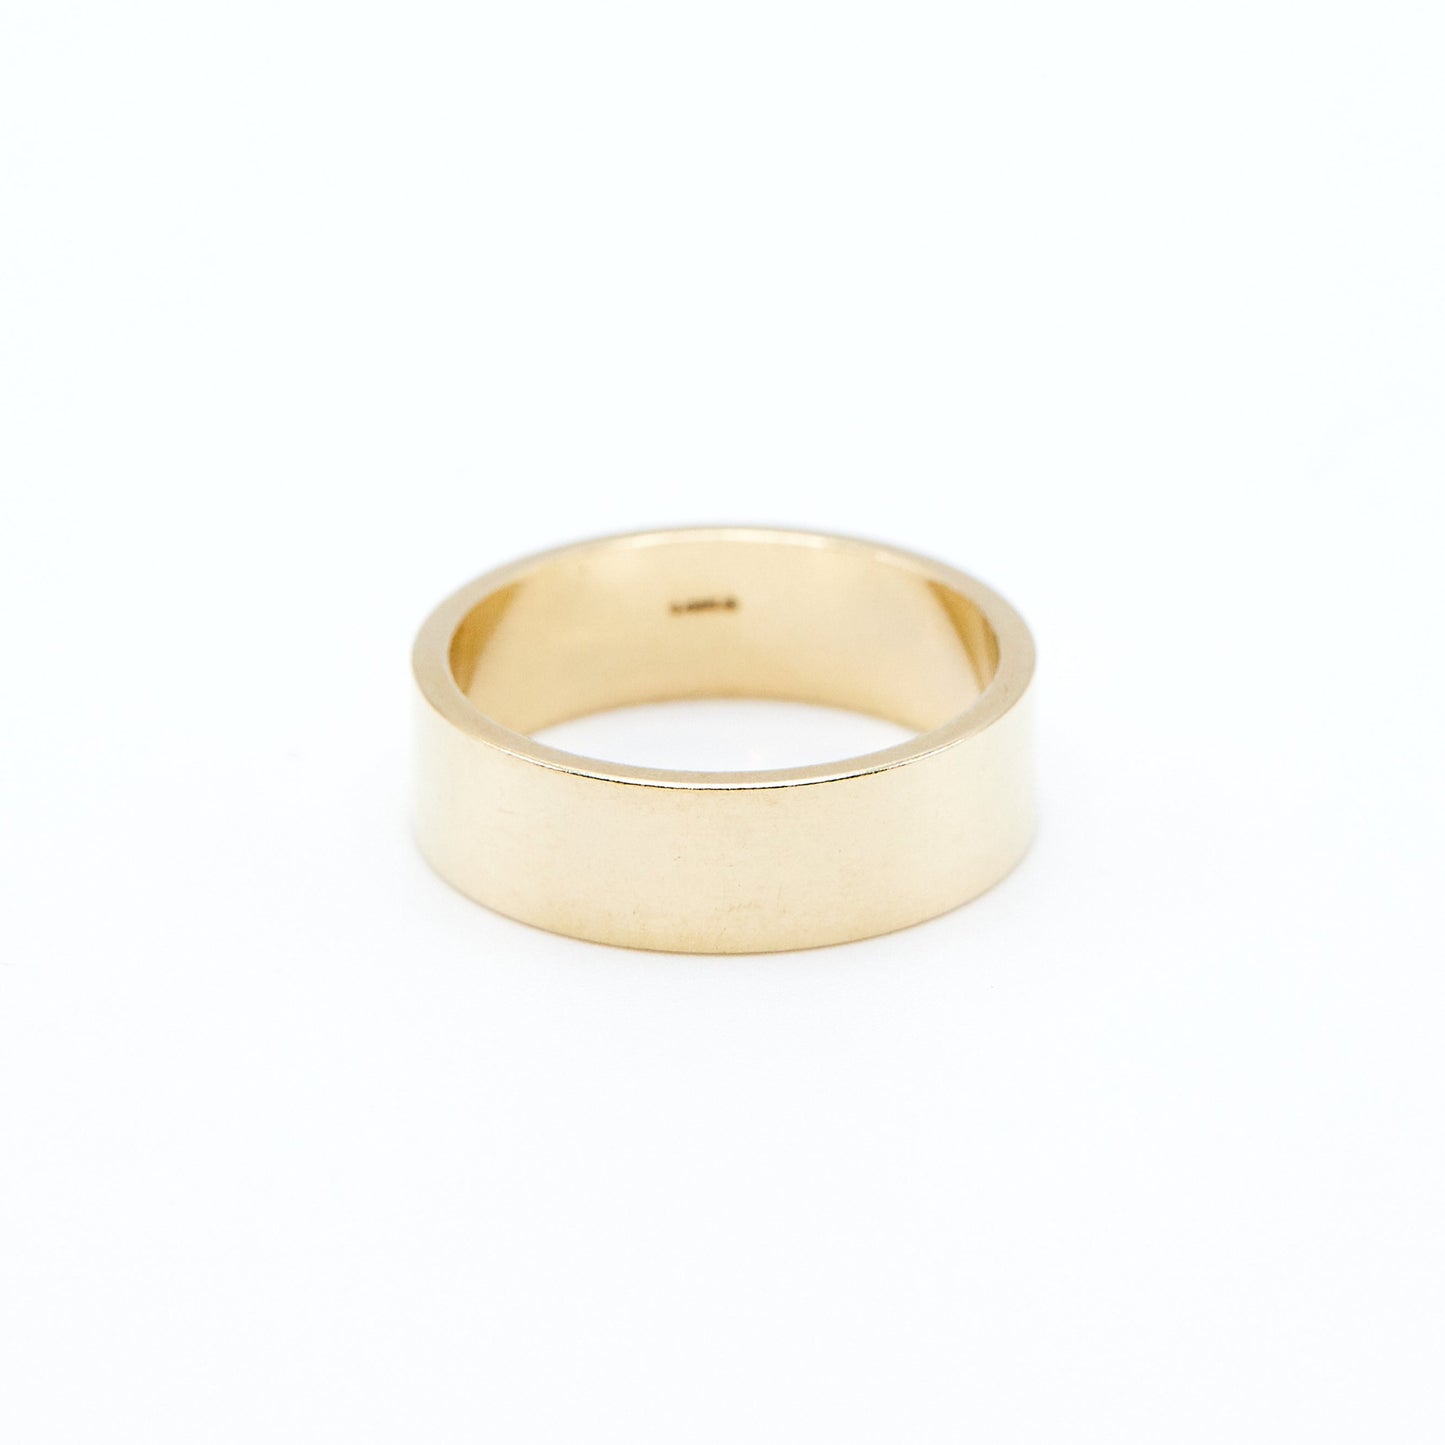 flat profile yellow gold wedding band with a high polish finish on a white background